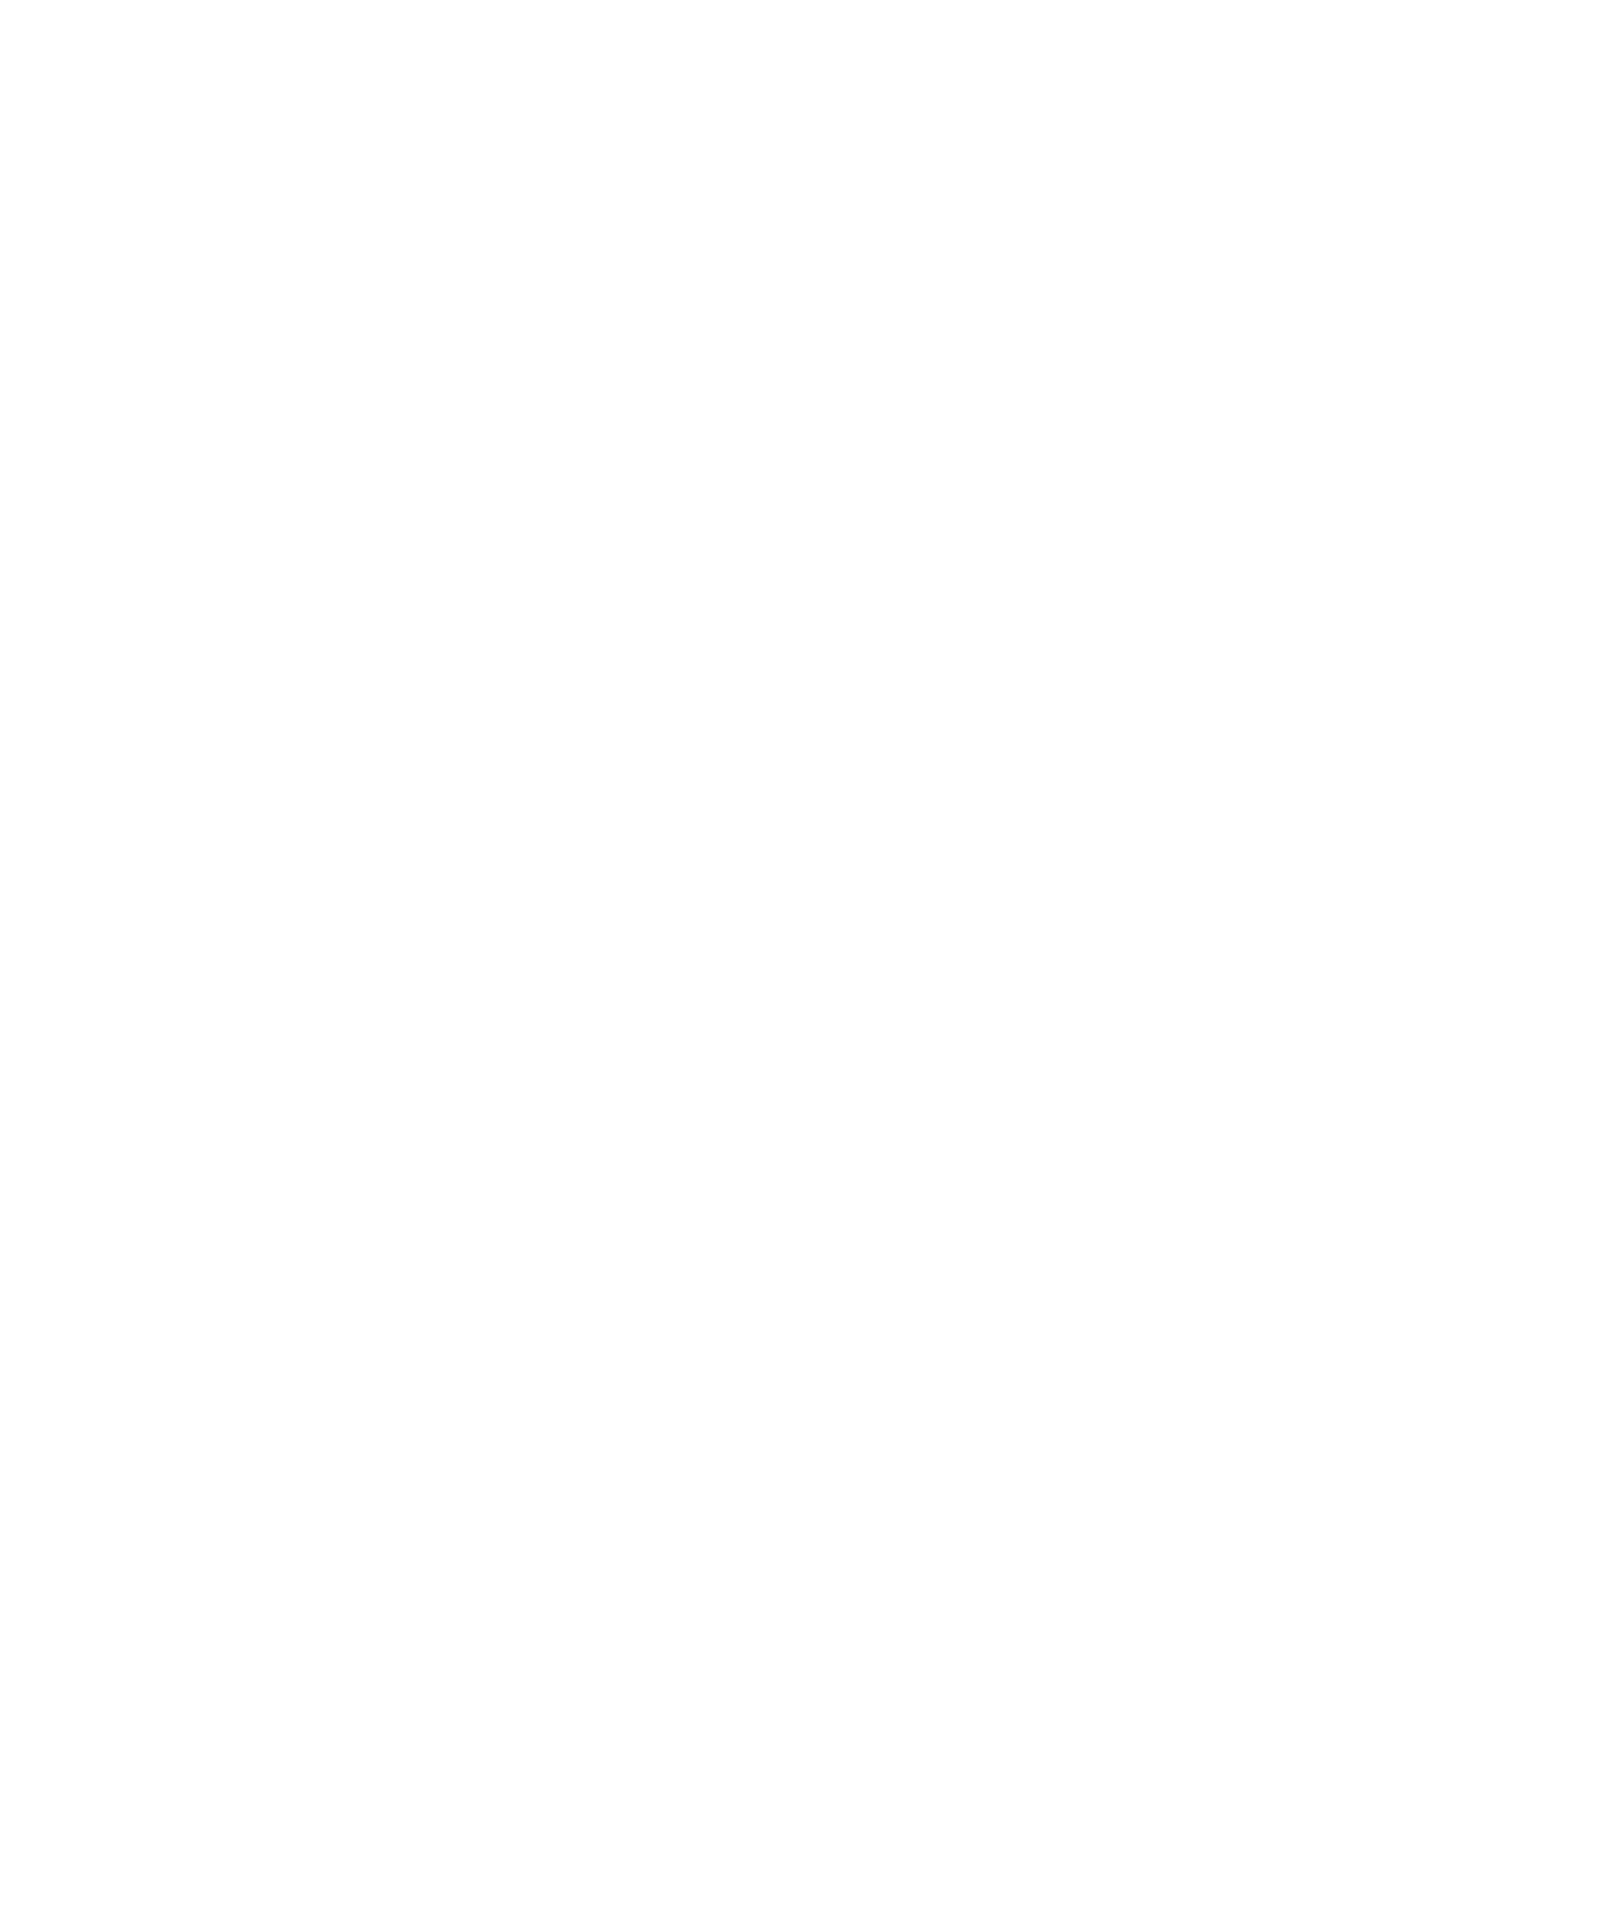 Redefining sustainabilty with your old garmenets